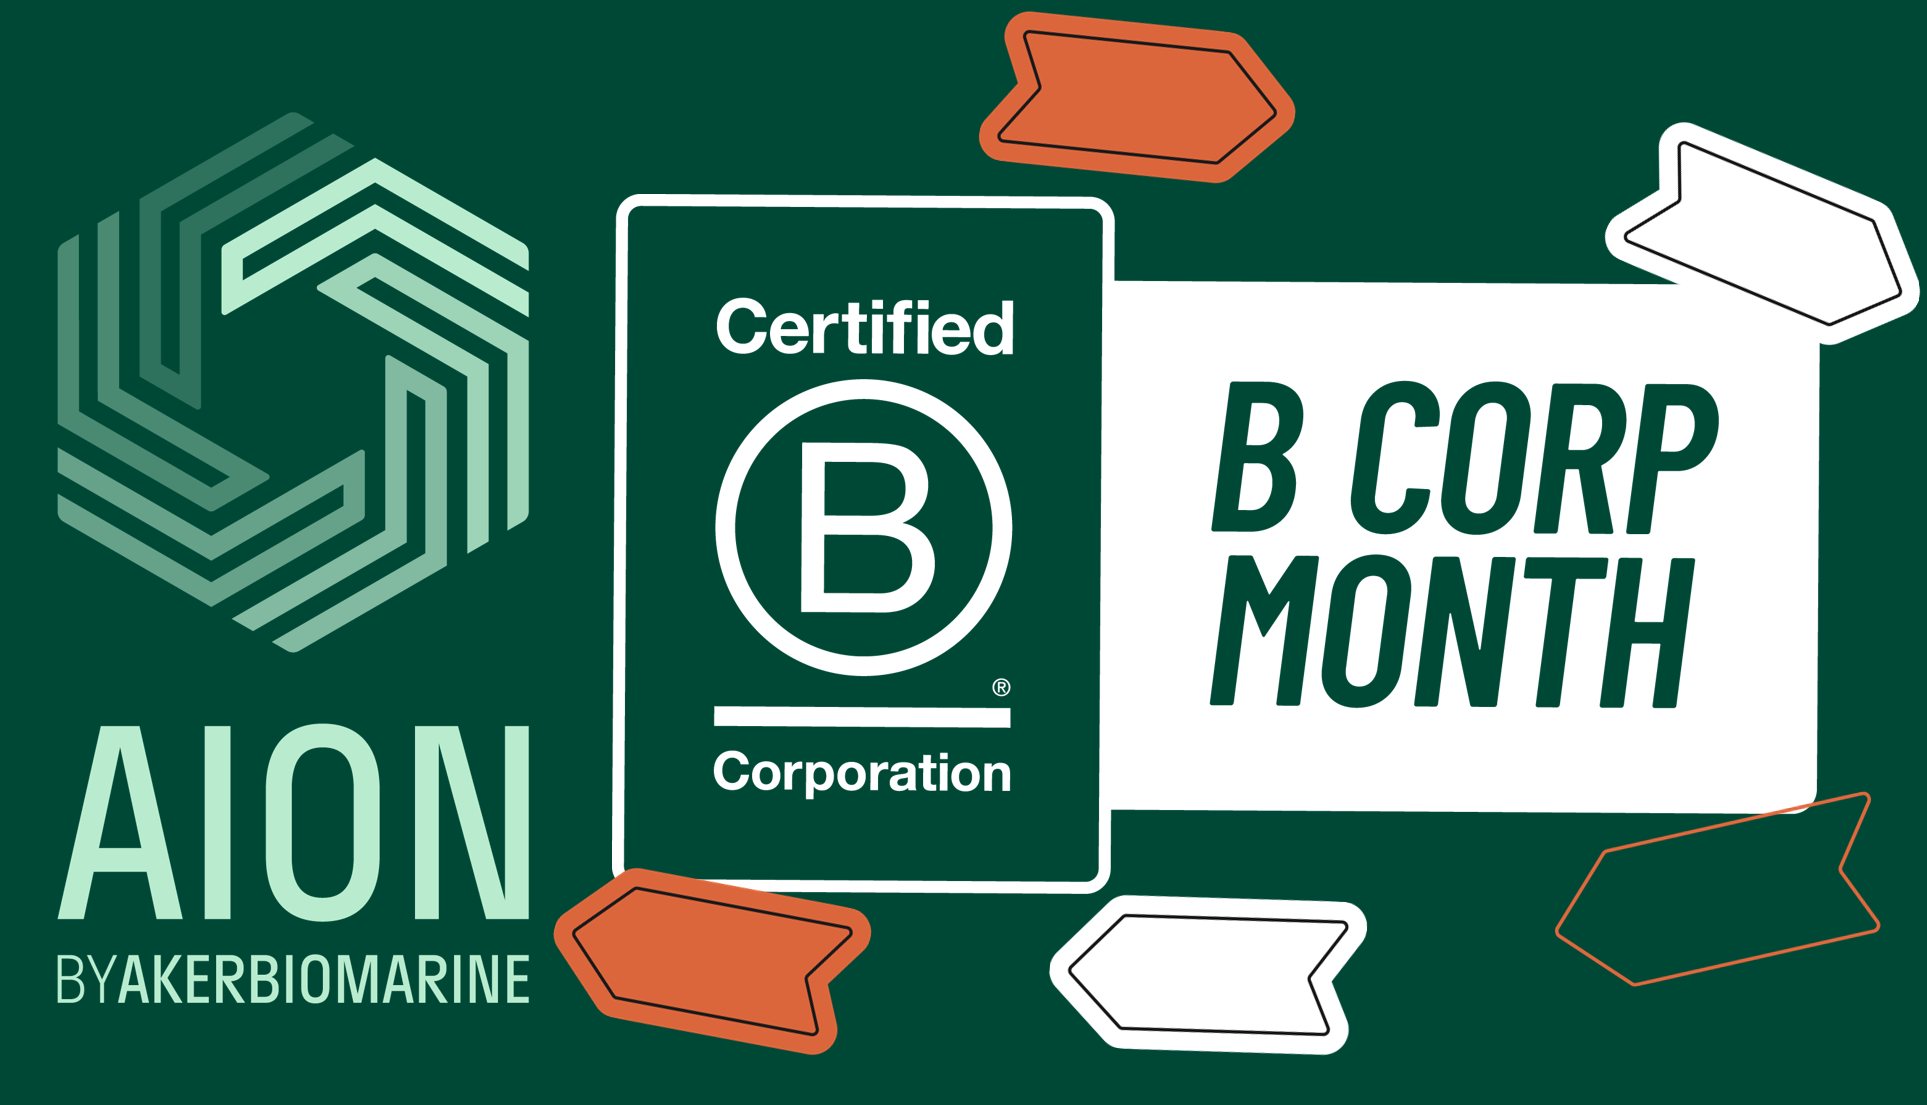 AION celebrates B-corp month this March